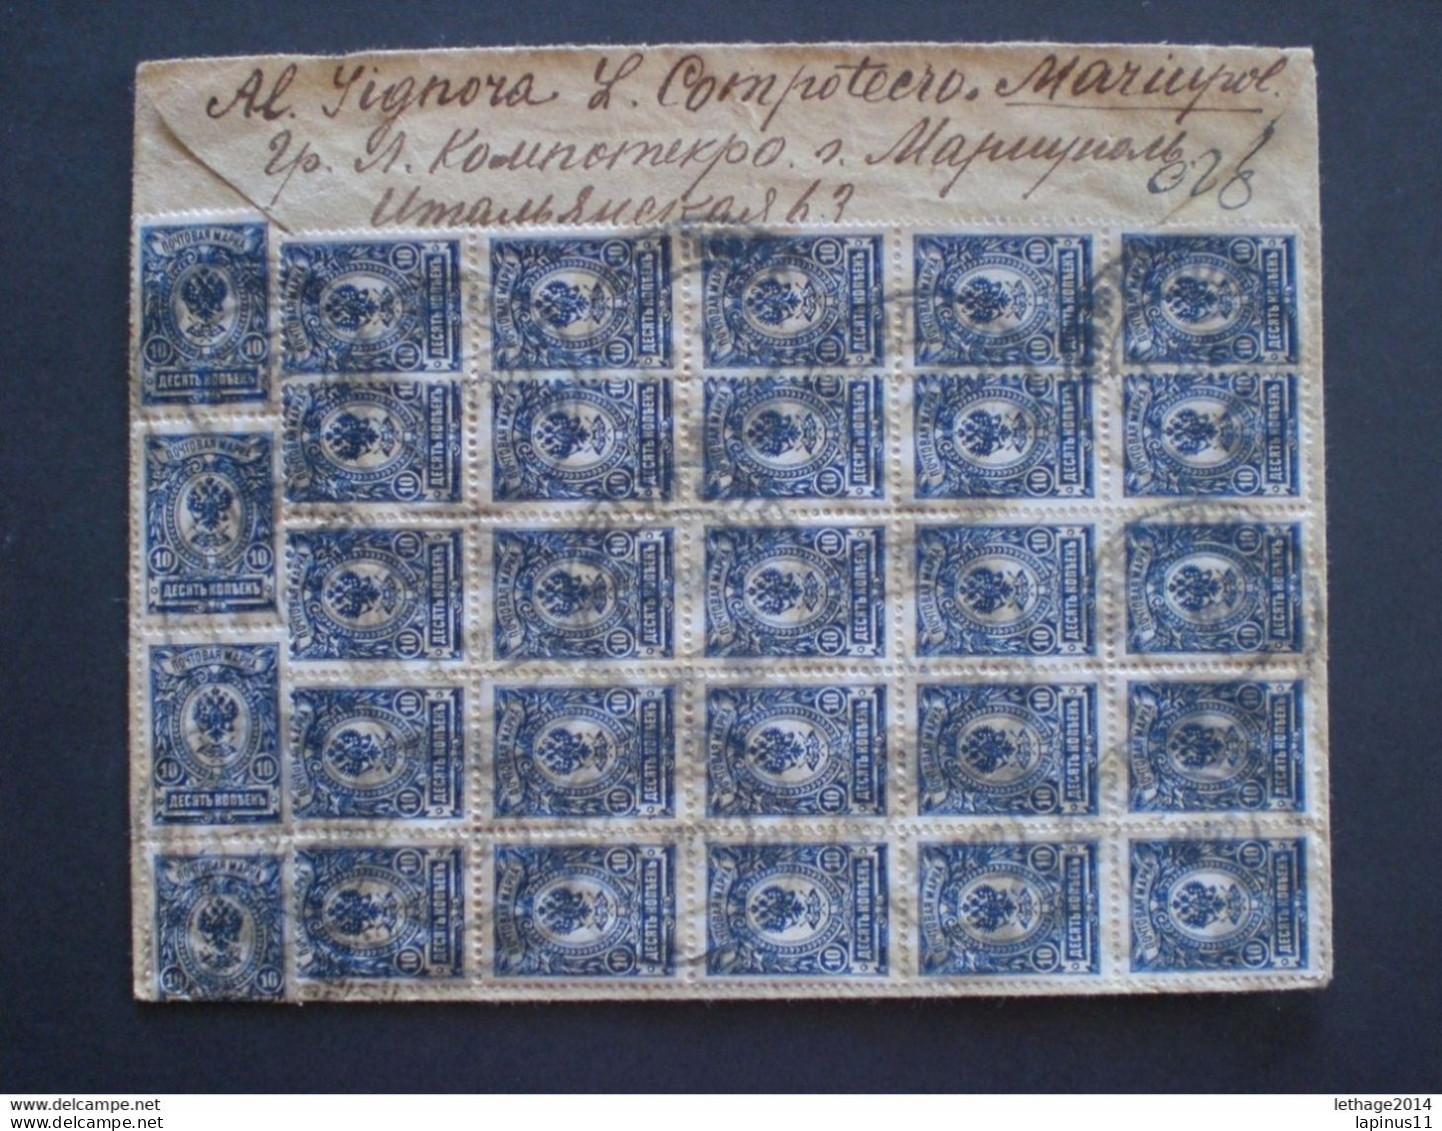 RUSSIA RUSSIE РОССИЯ STAMPS COVER 1923 Registered Mail RUSSIE TO ITALY MANY STAMPS FULL 30 STAMPS !! RRRRR RIF.TAGG.(2) - Cartas & Documentos